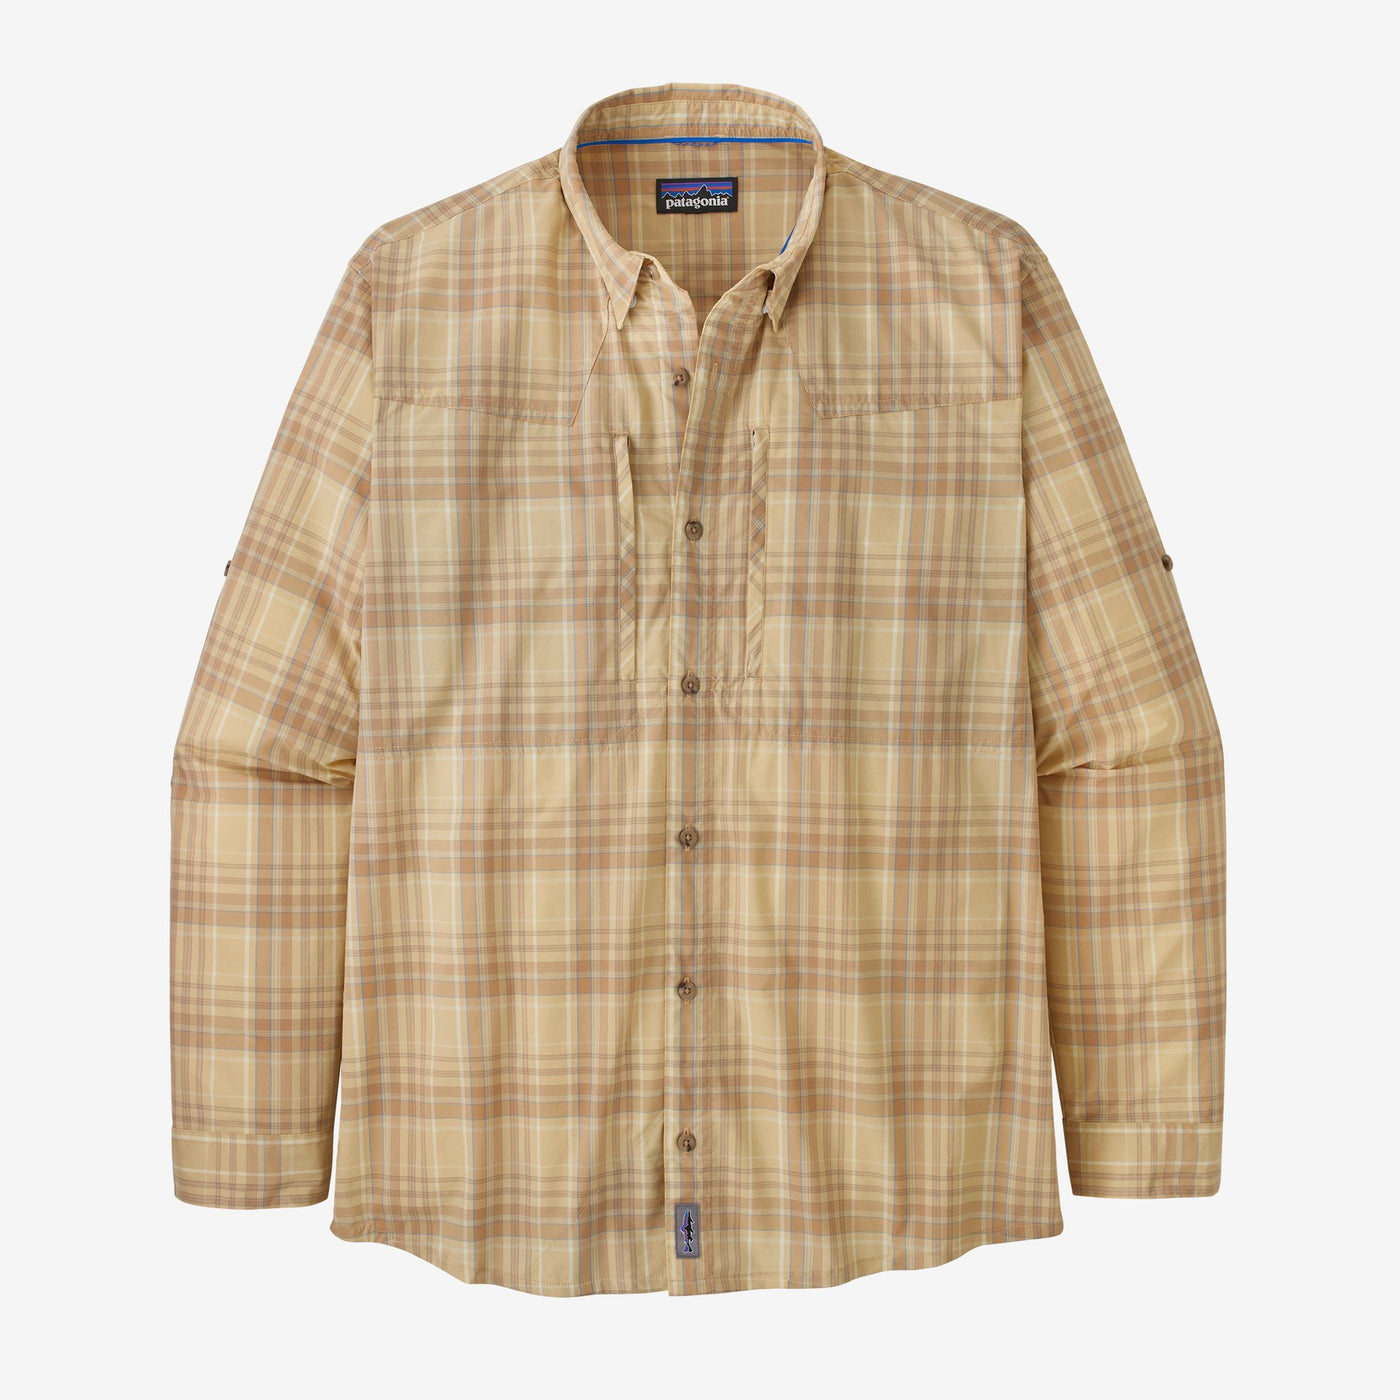 Patagonia Men's L/S Sun Stretch Shirt On Sale Now 40% OFF!